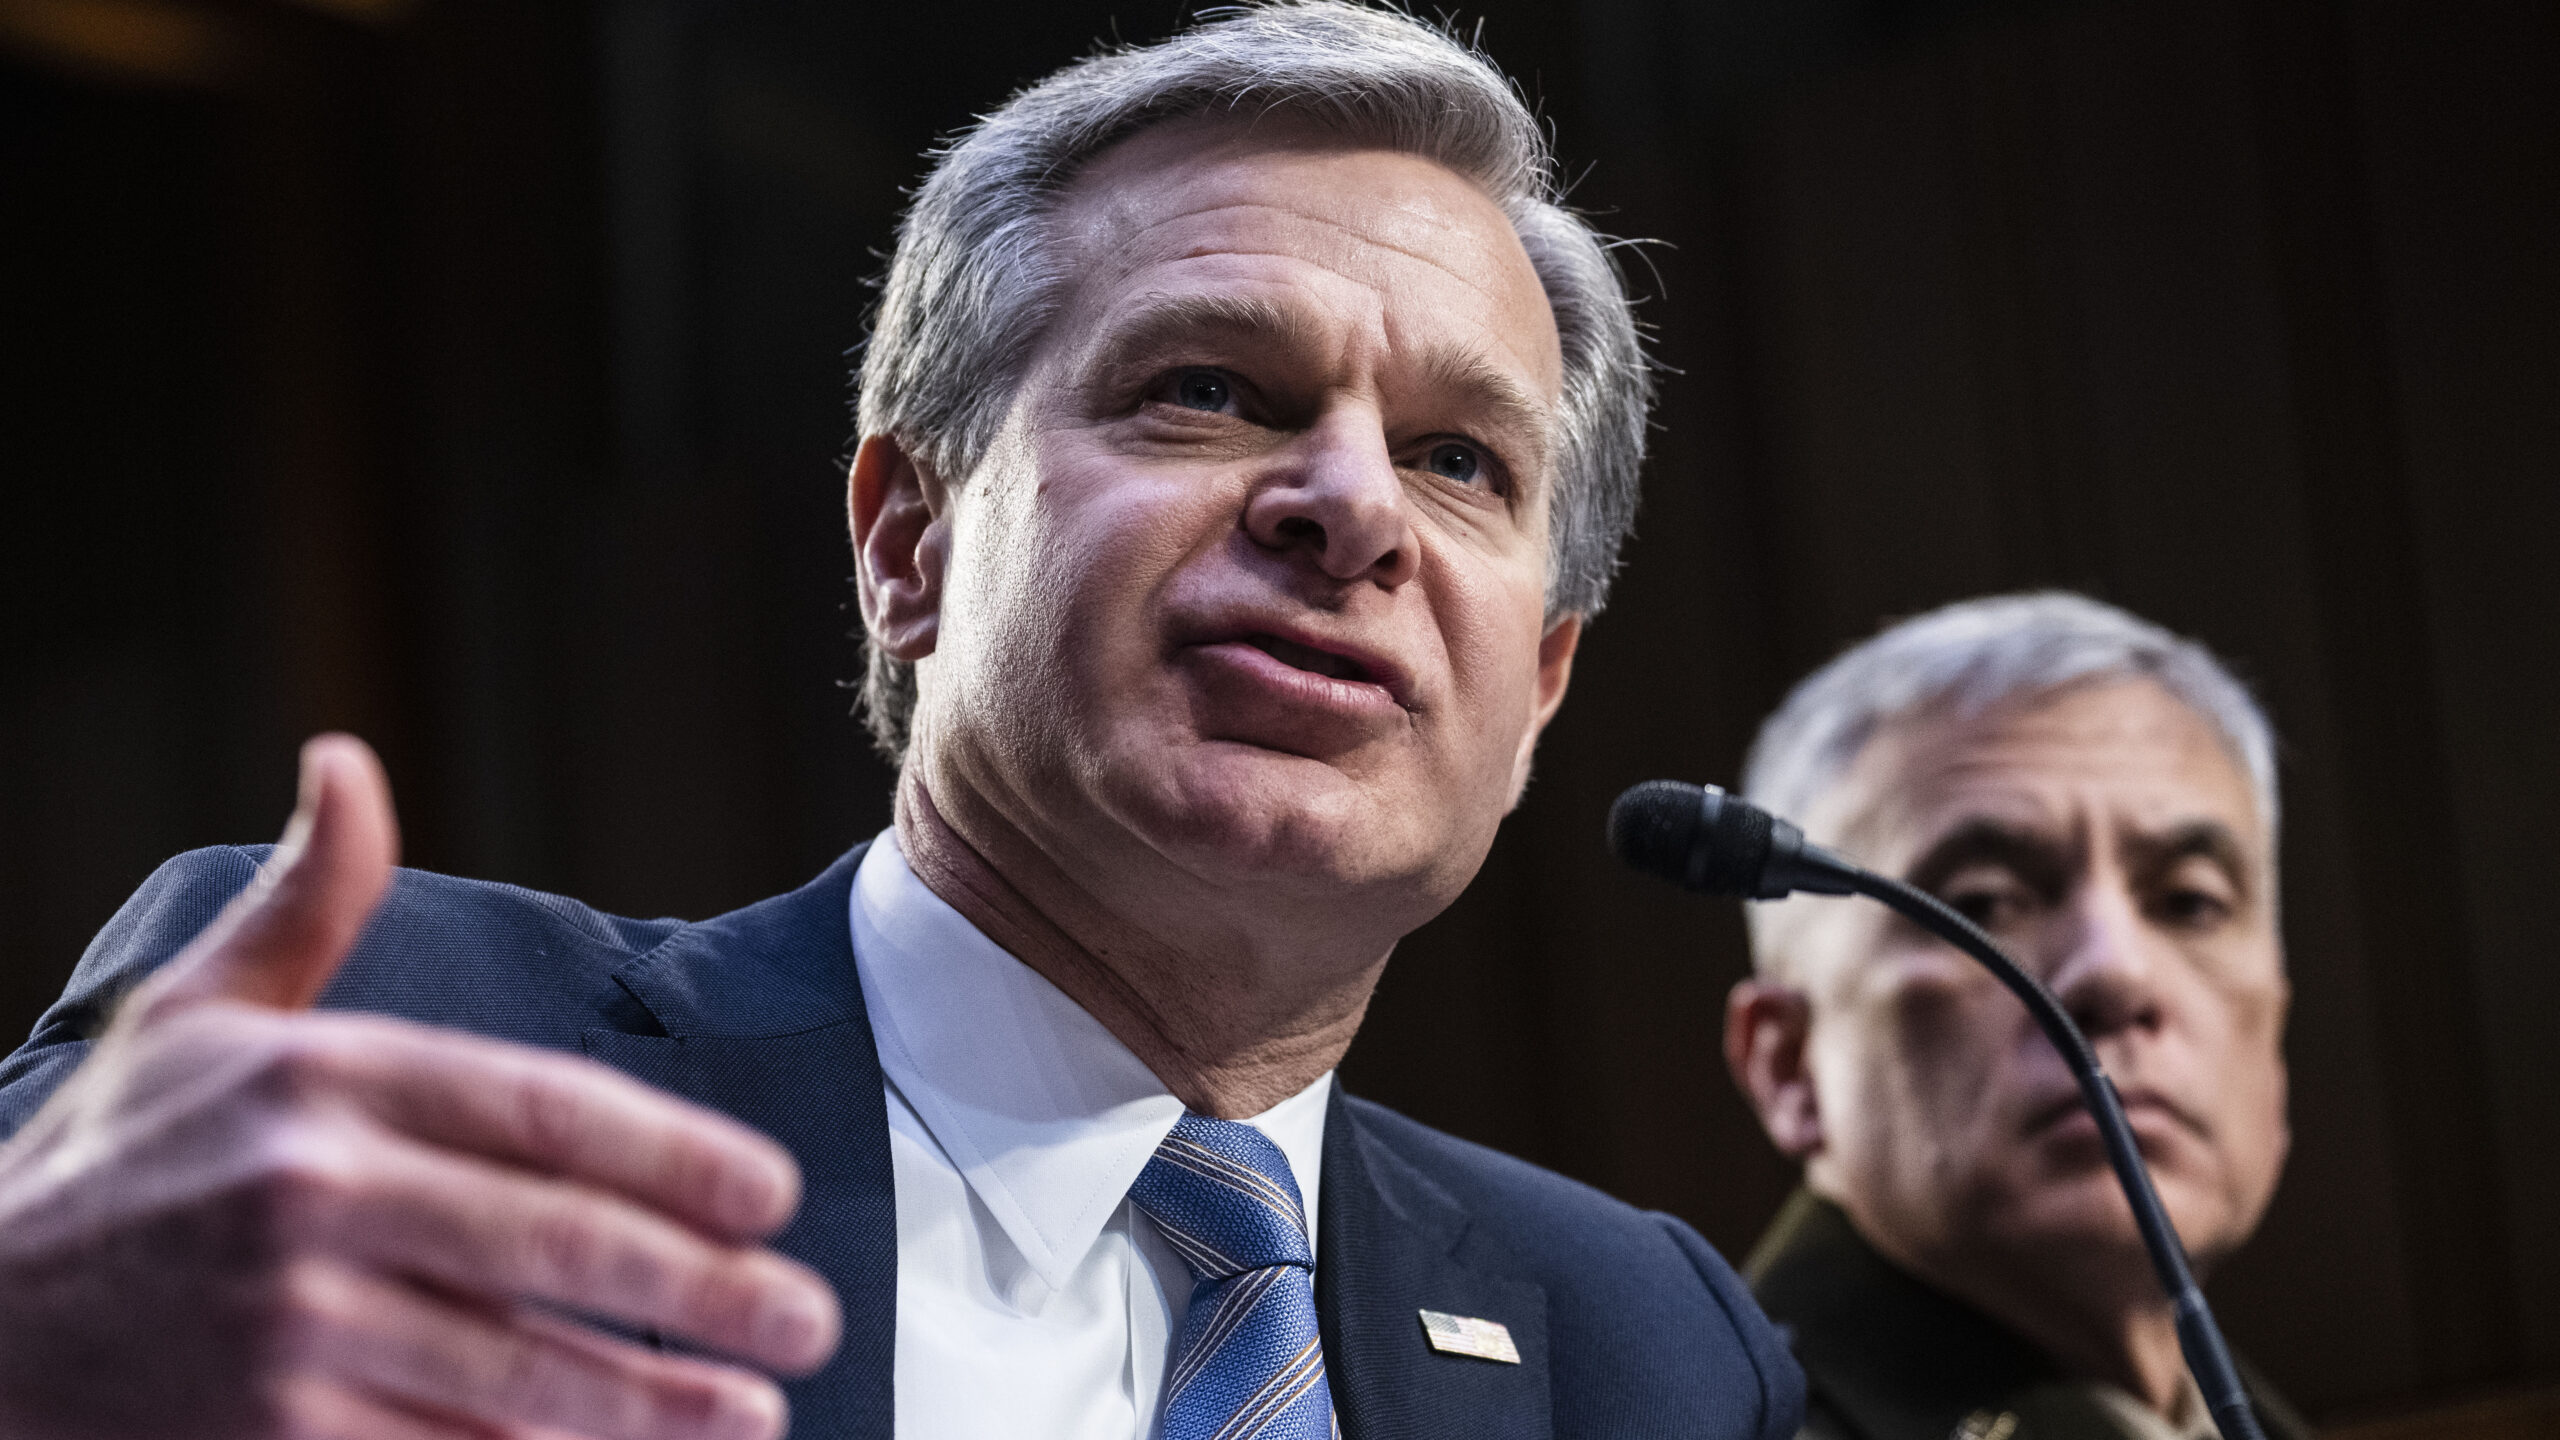 FBI Director Wray Raises Concerns About Terror Threat, TikTok, and Protest Remarks